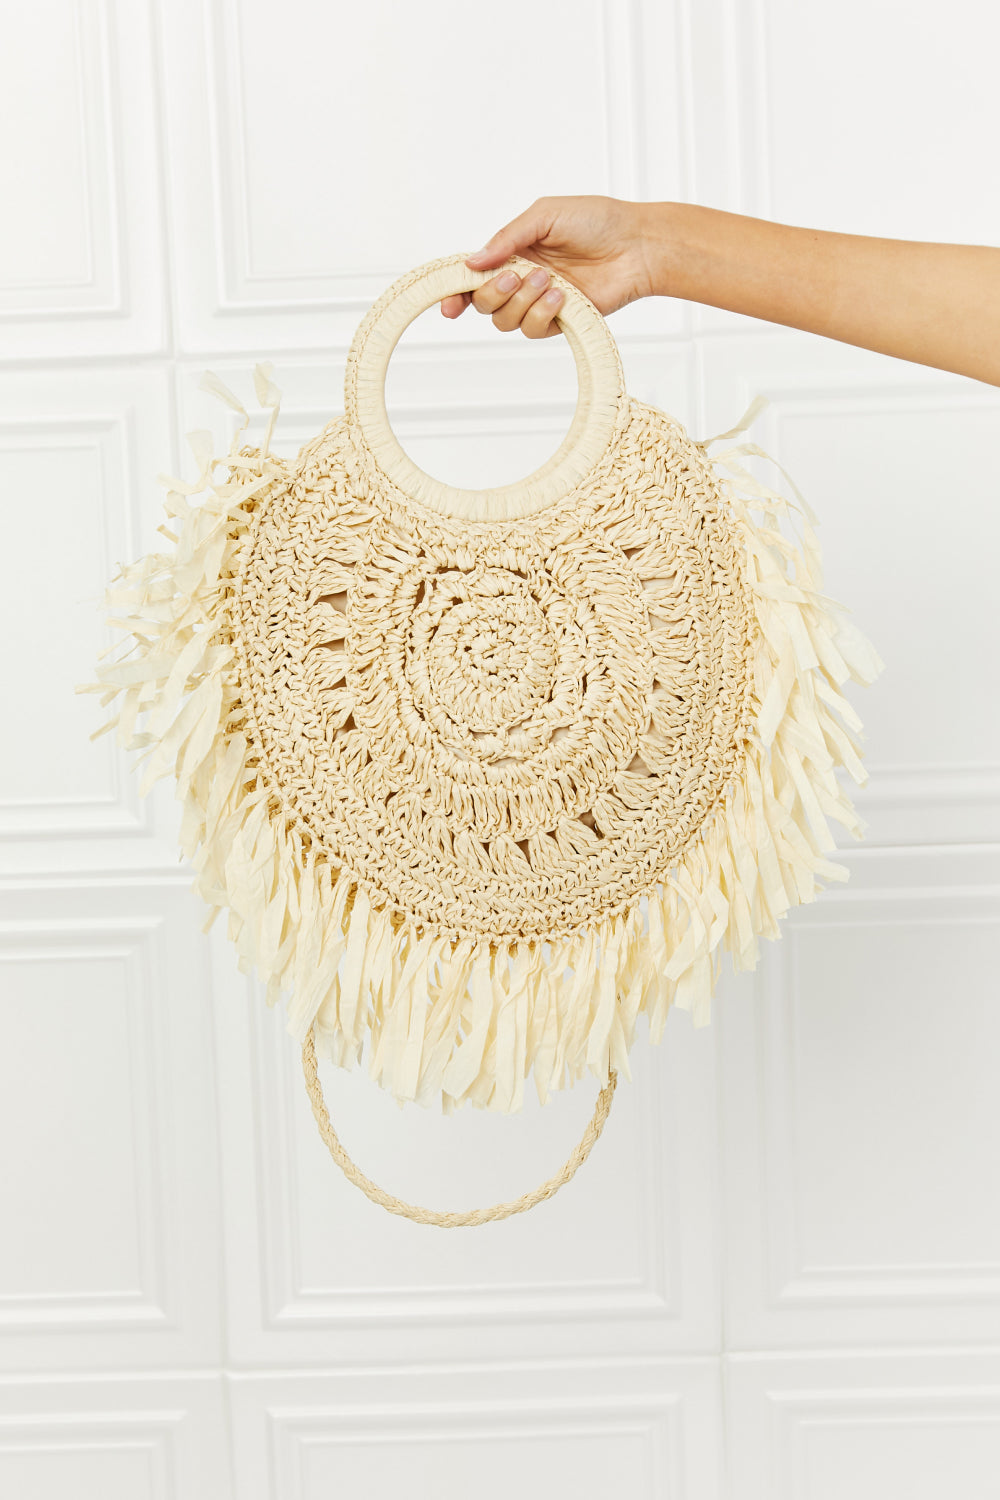 Fame Found My Paradise Straw Handbag - Online Only